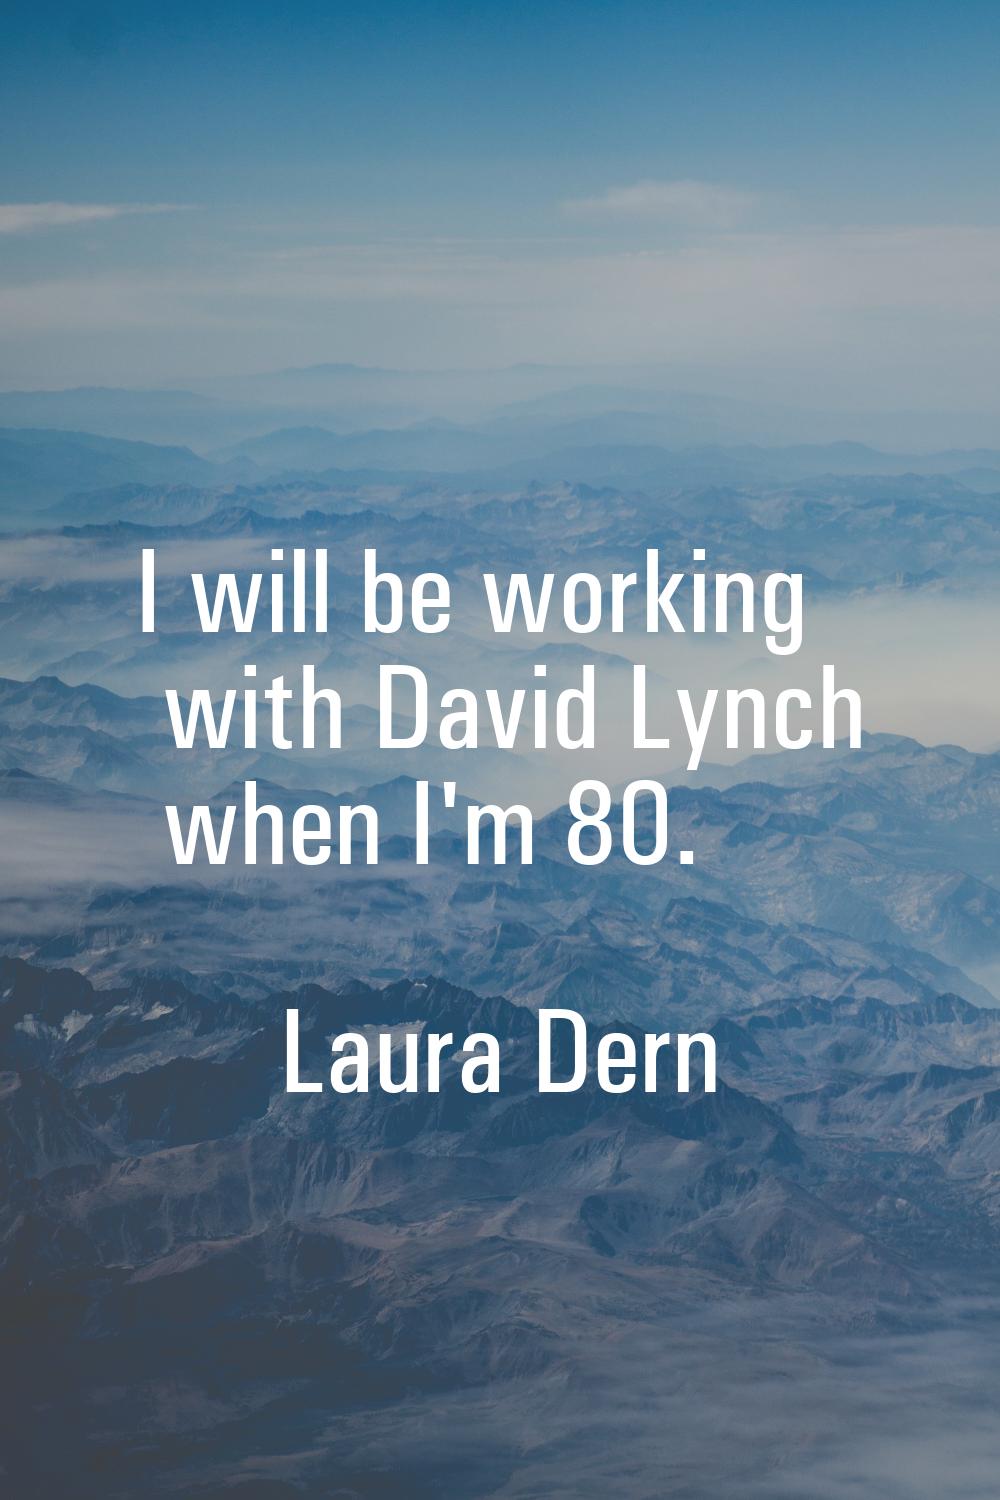 I will be working with David Lynch when I'm 80.